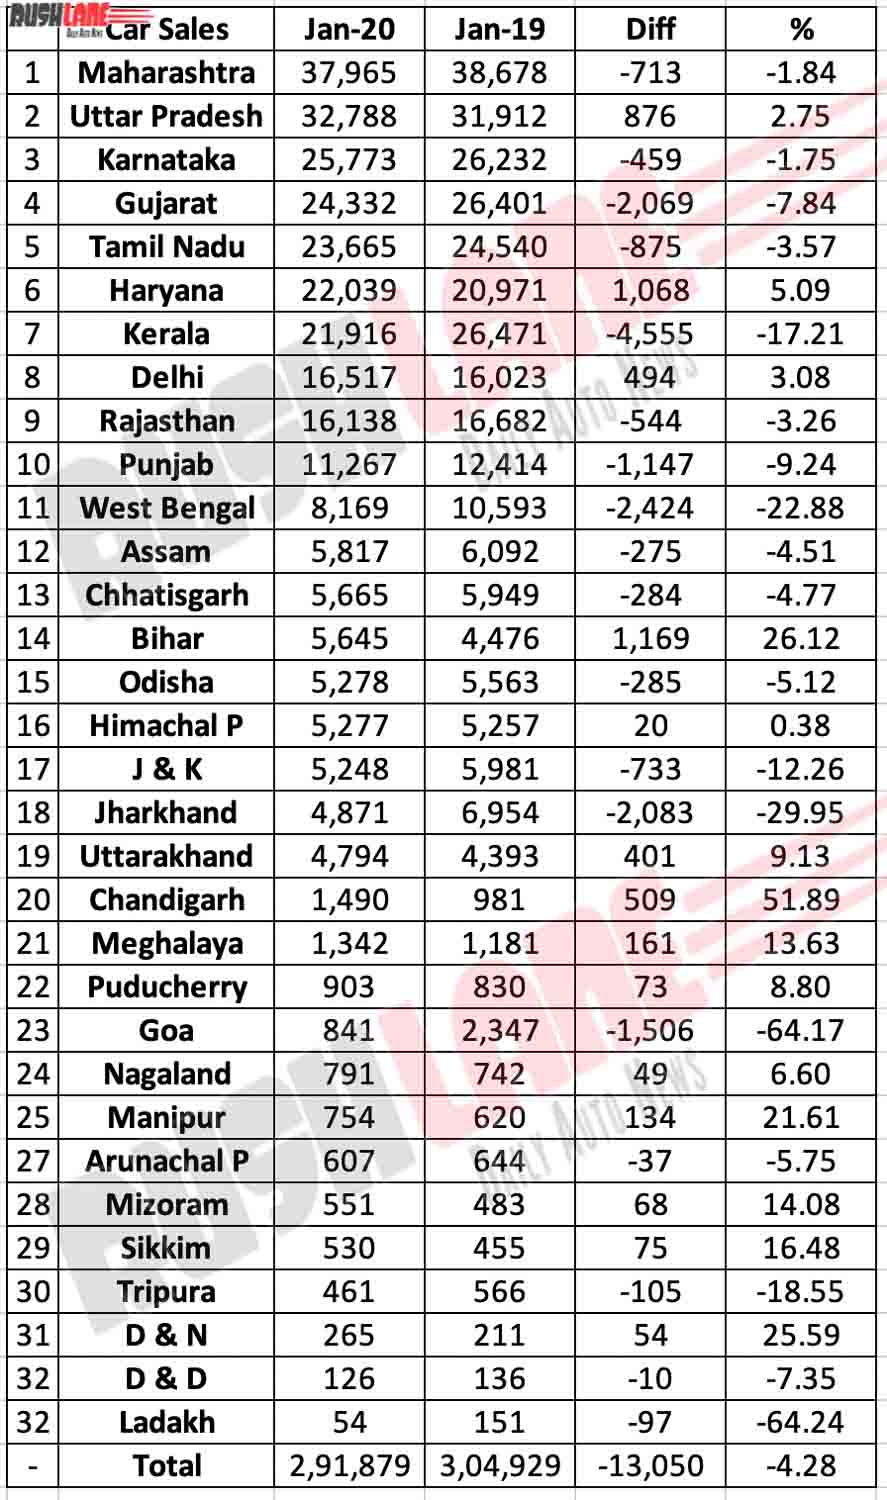 Car sales as per States and UTs of India.